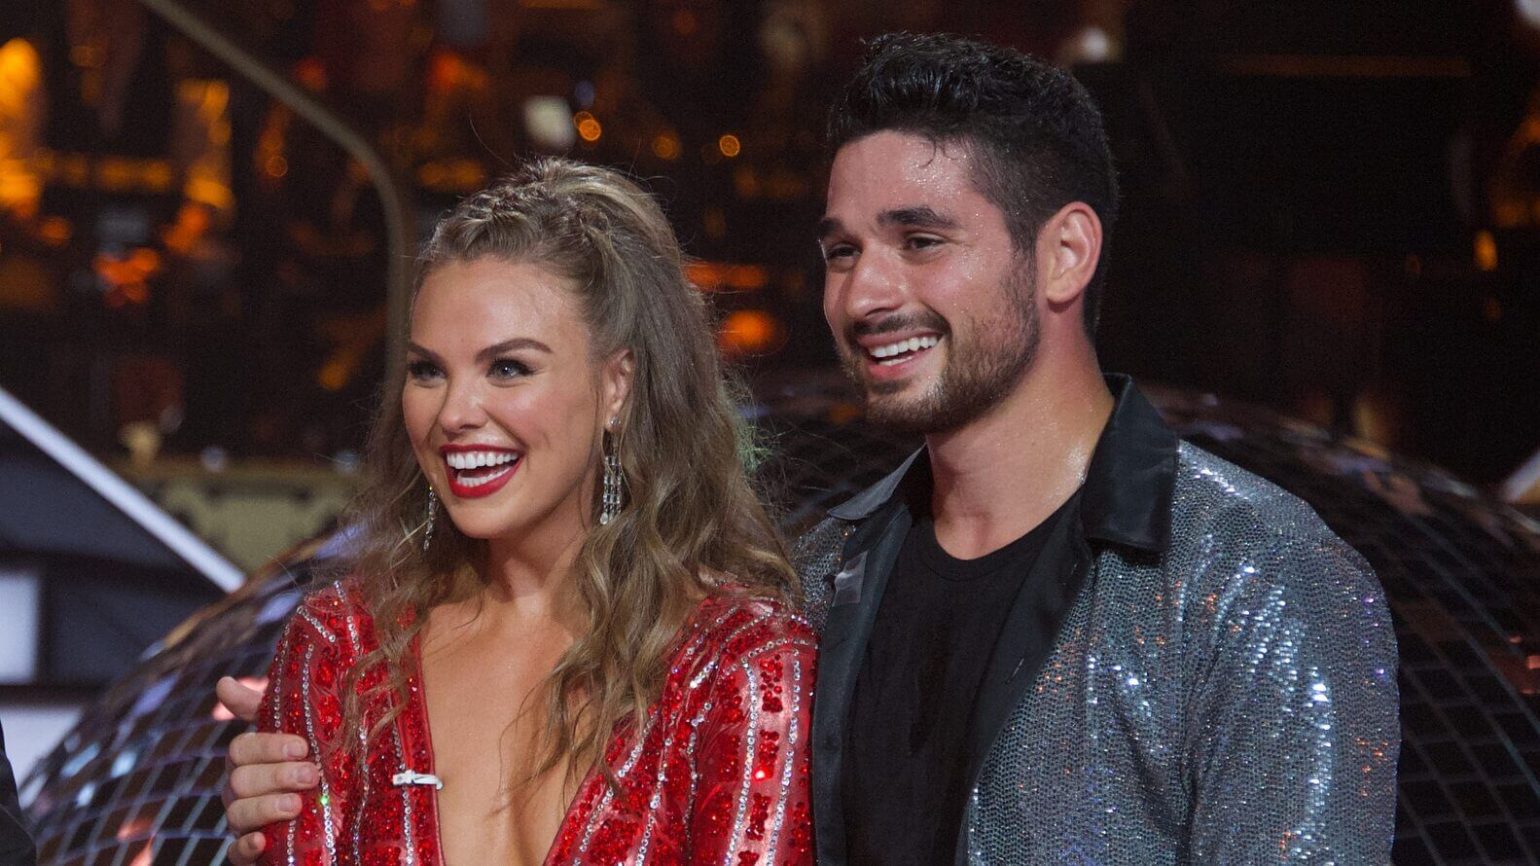 DWTS Predictions Who Will Be First Eliminated Tonight?